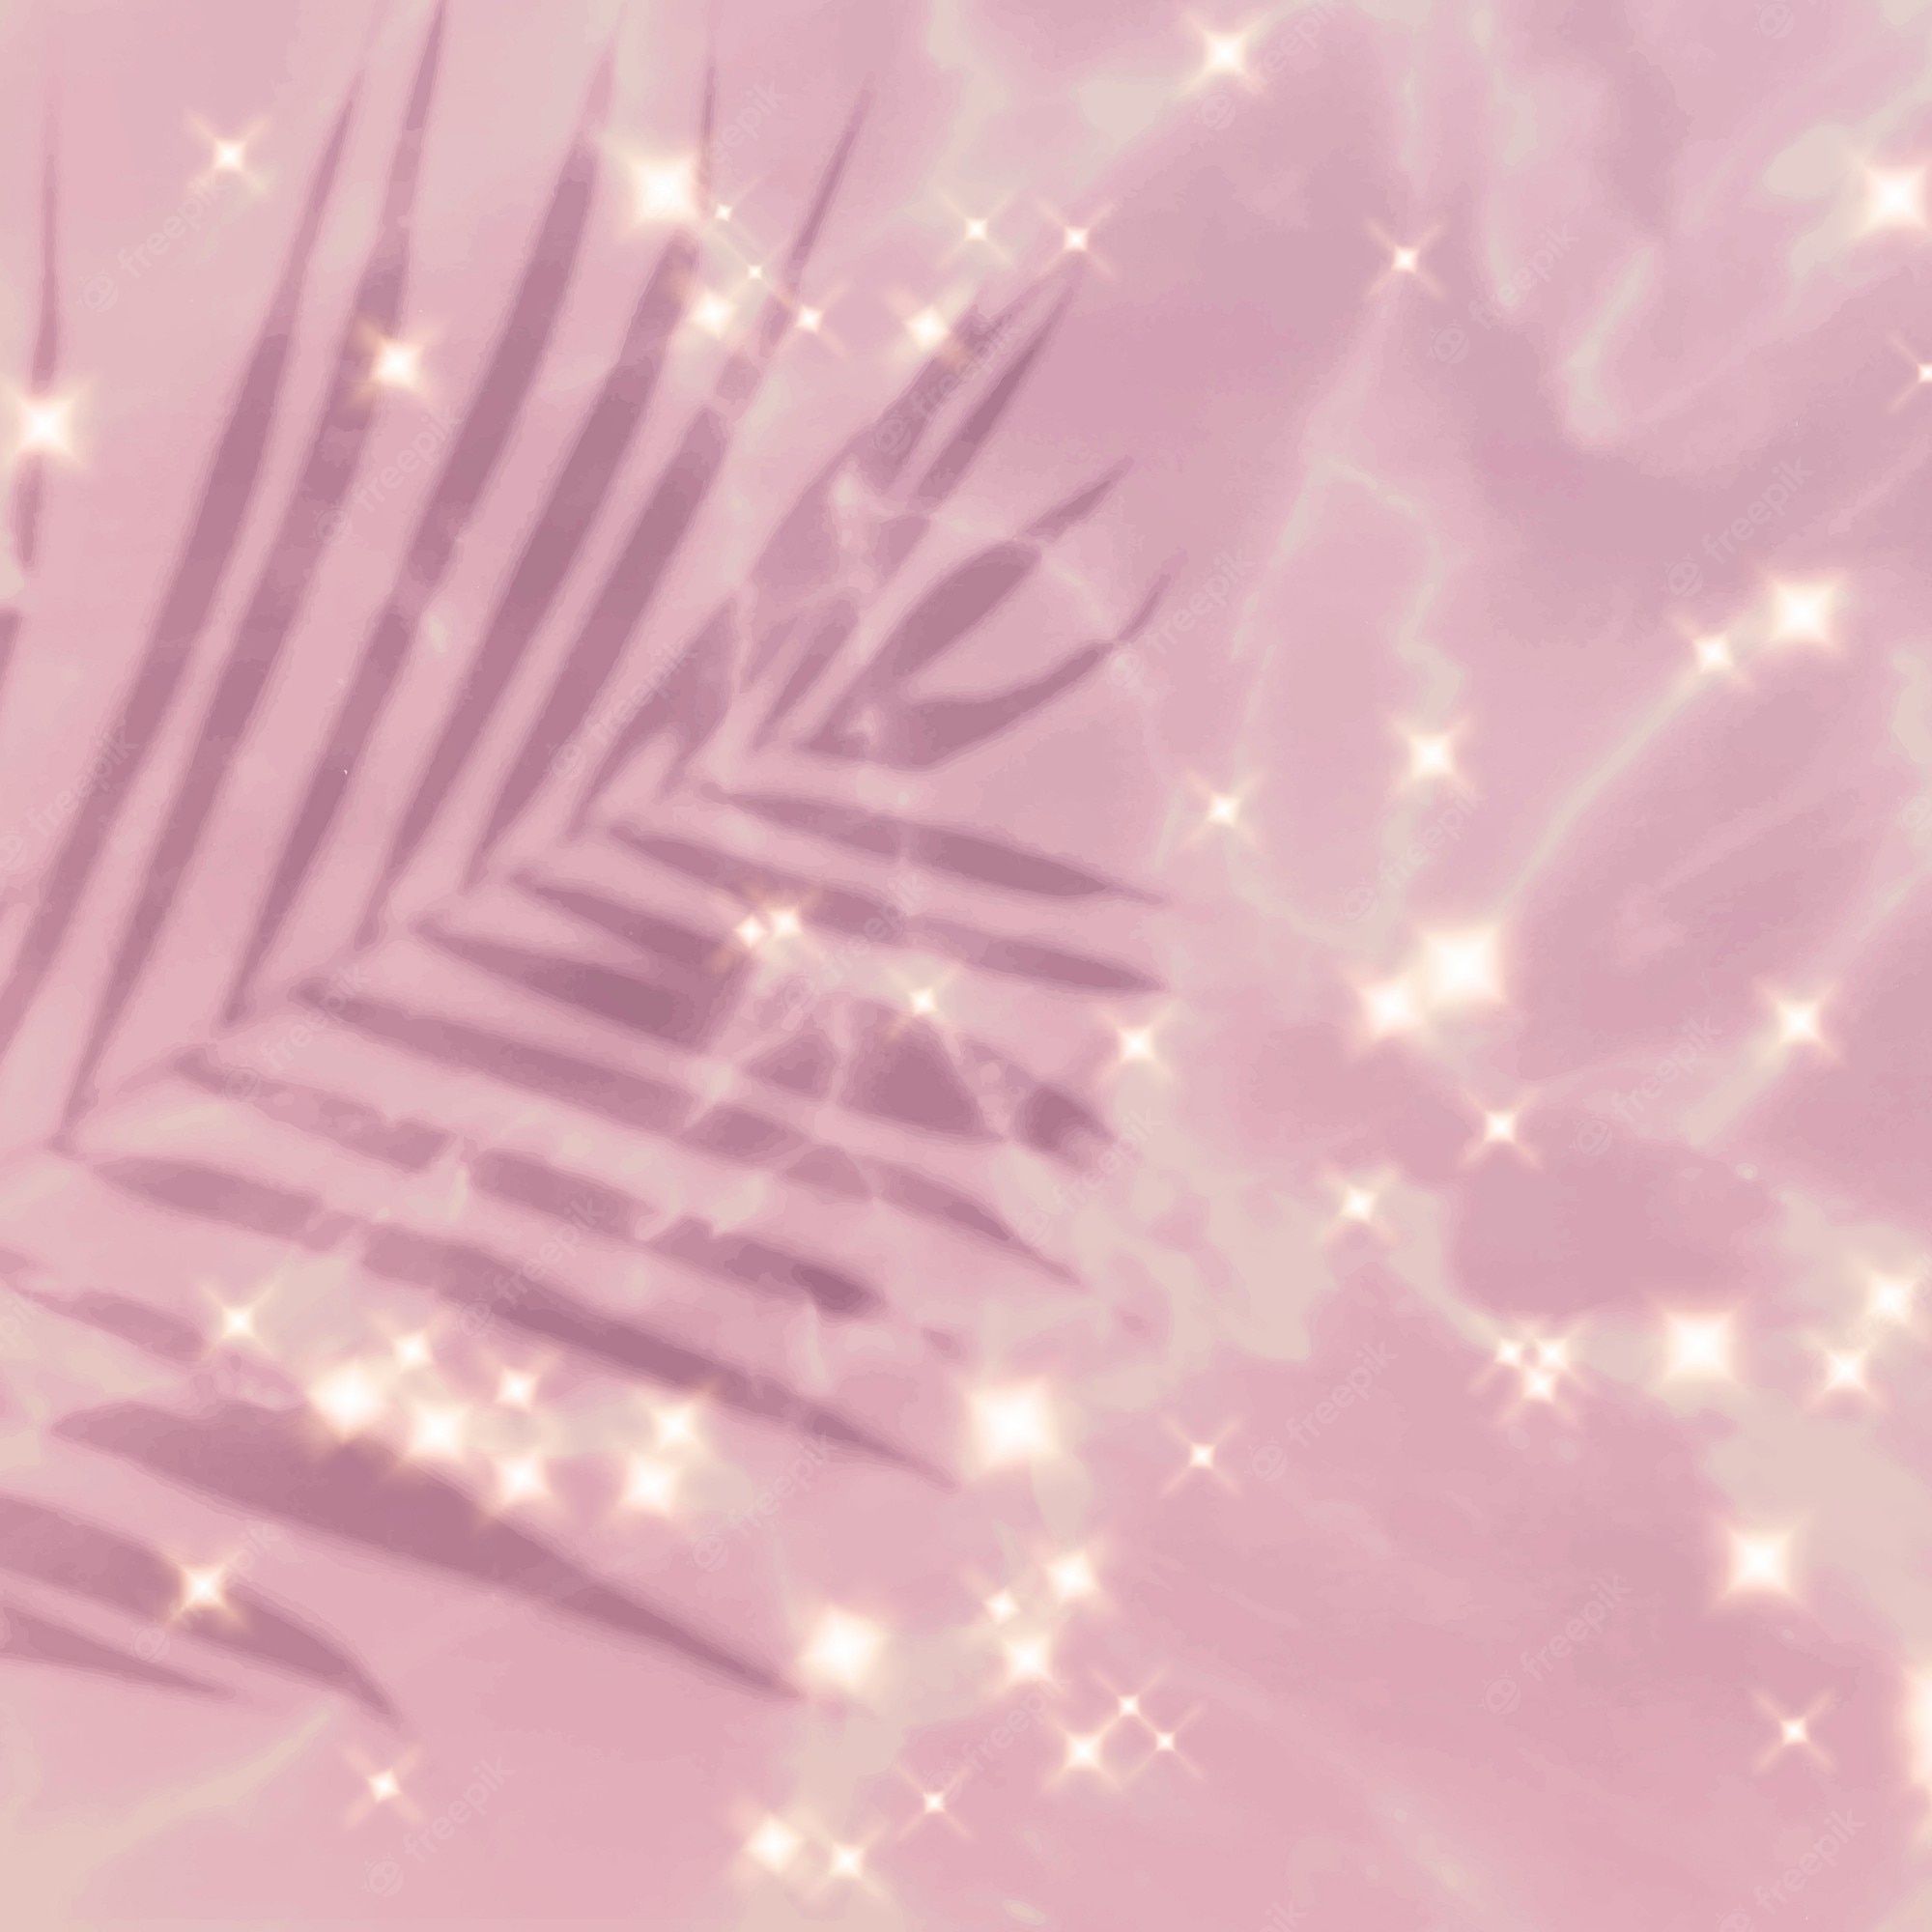 A pink background with palm leaves and stars - Light pink, soft pink, pink, cute pink